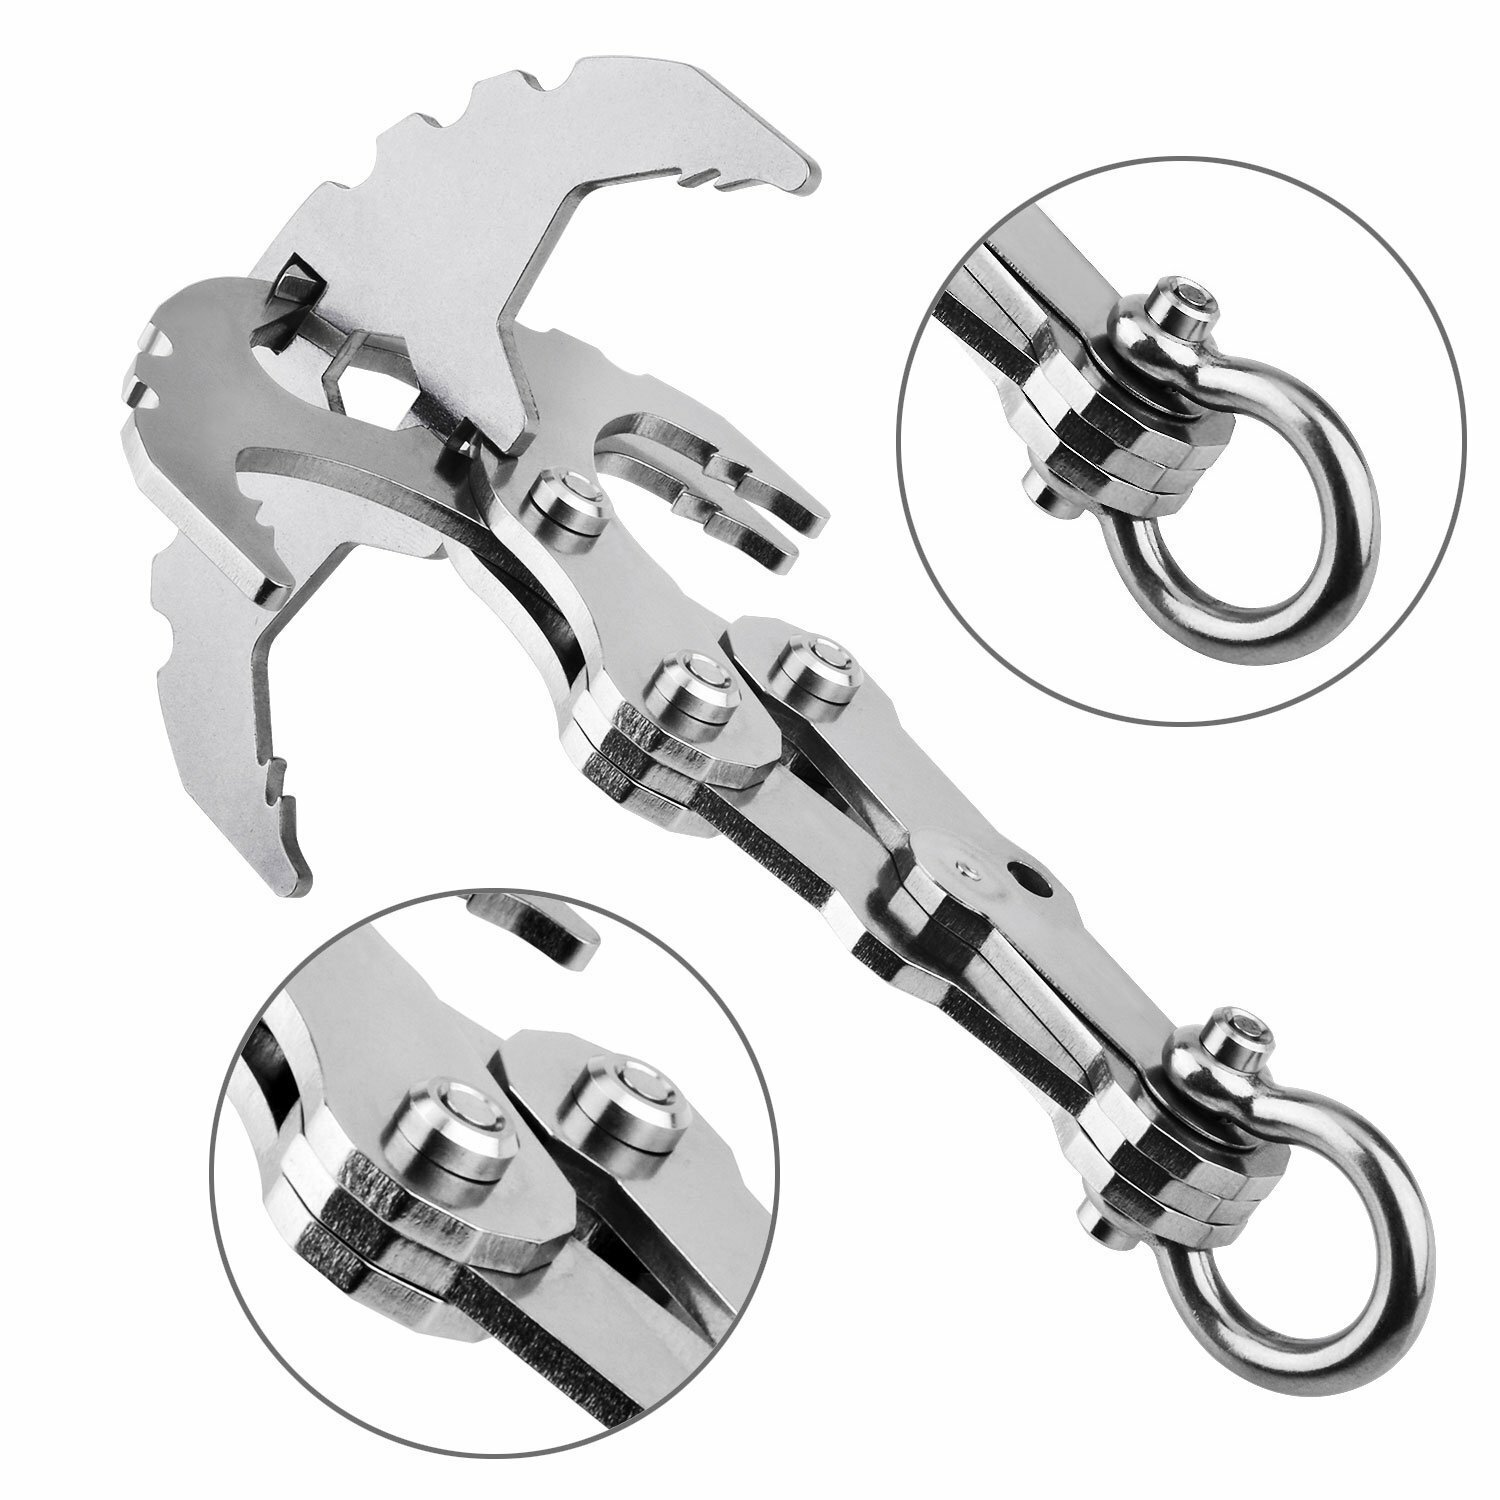 Outdoor 3 Claws Grappling Hook Climbing Survival Carabiner Tool Stainless Steel